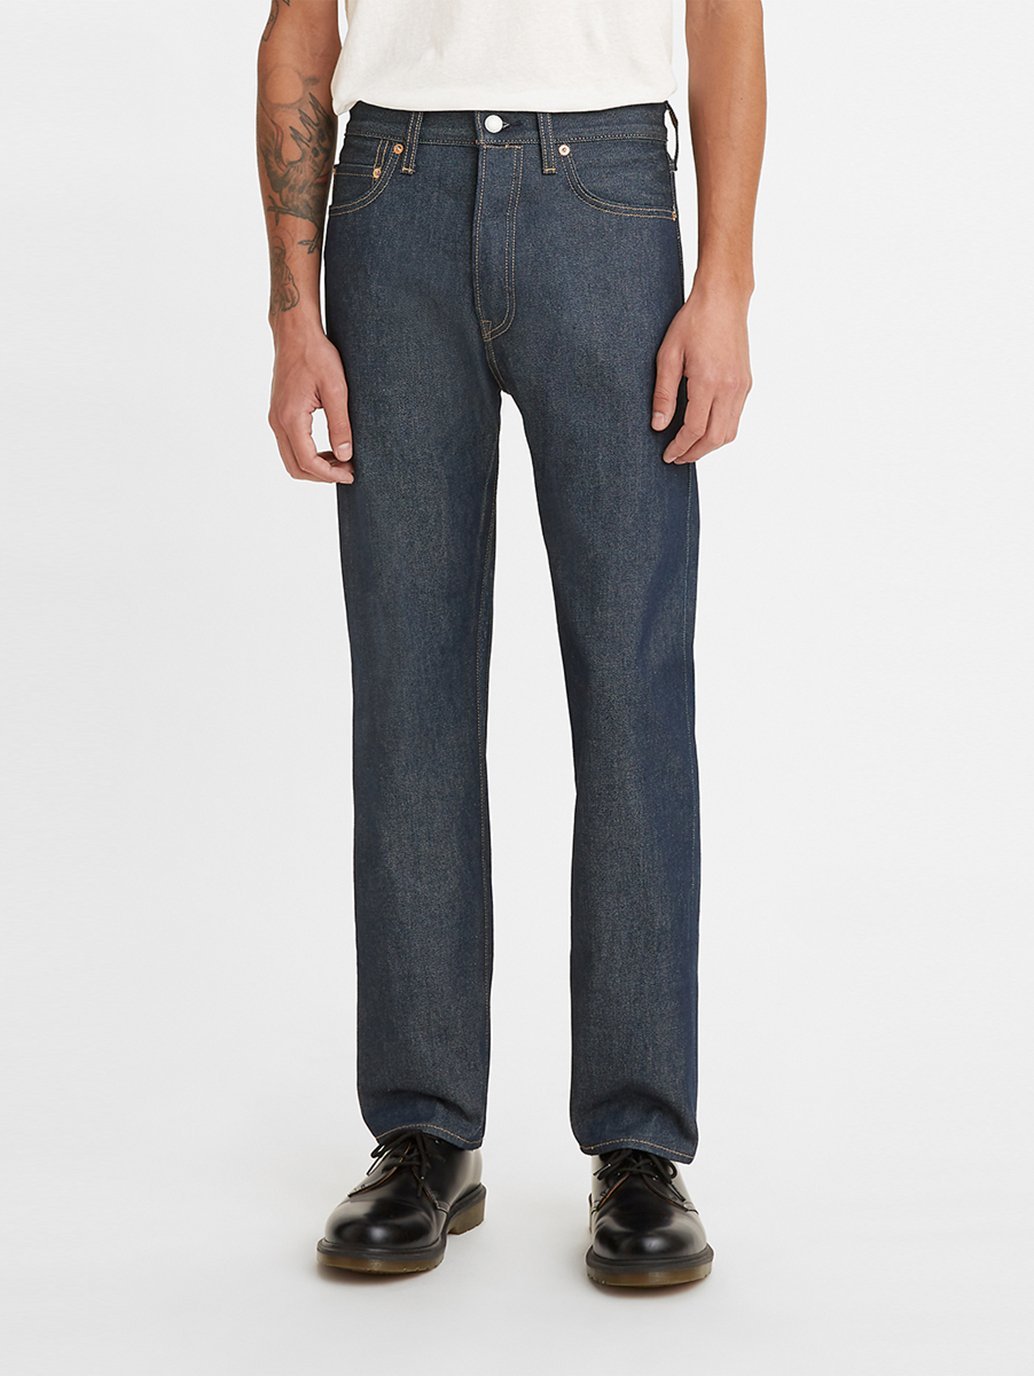 Buy Levi's® & Crafted® Men's 1980s 501® Jeans | Levi's® Official Online Store SG